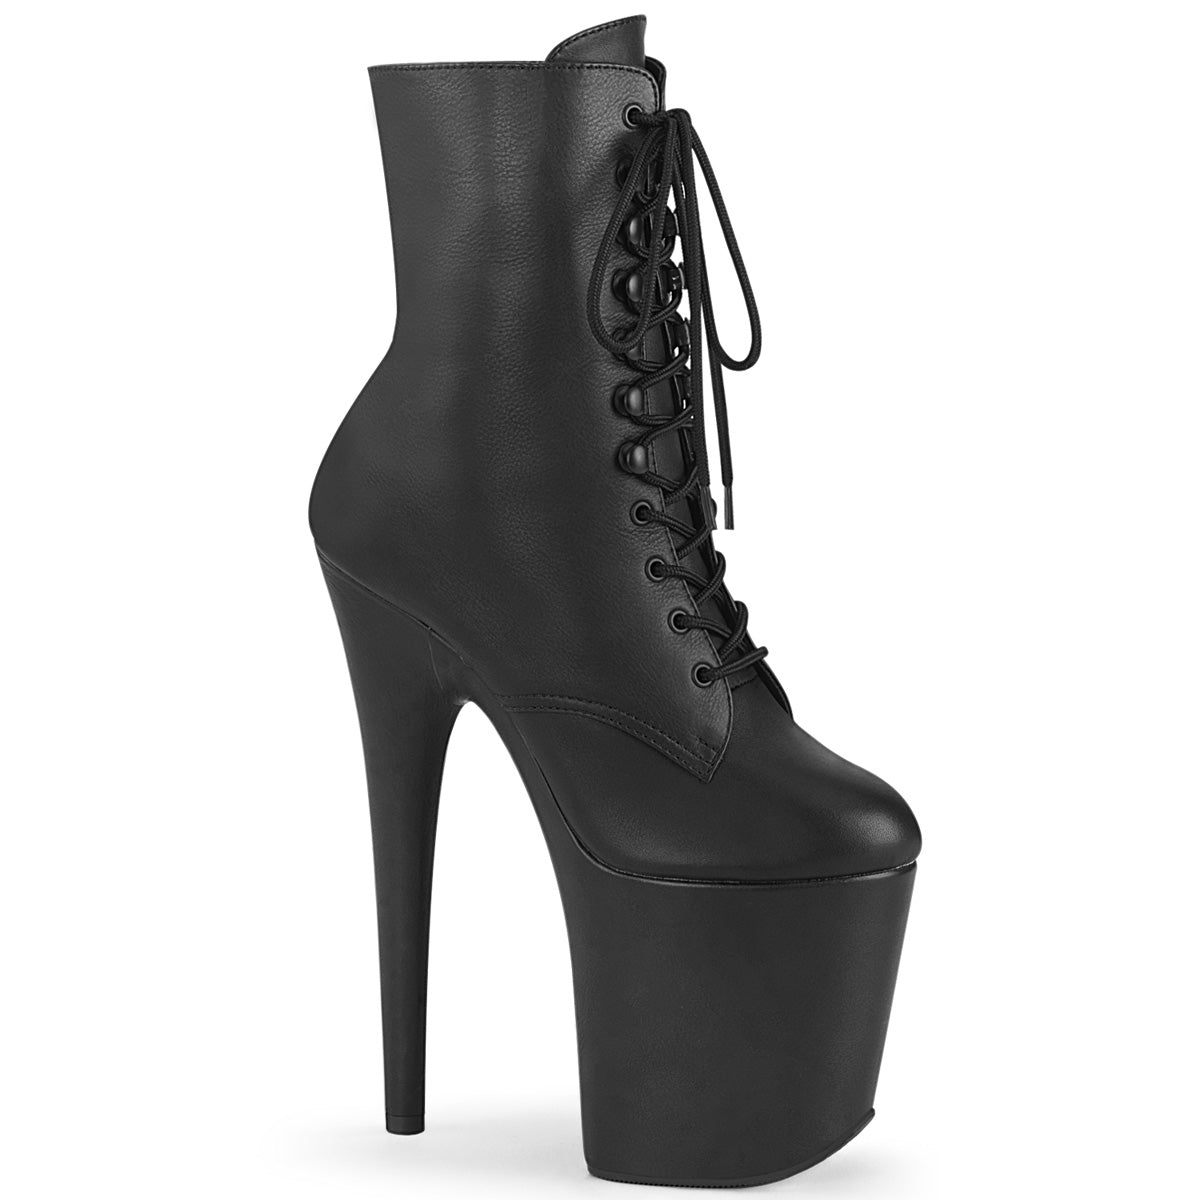 Pleaser FLAMINGO-1020LWR Black Leather 8 Inch (200mm) Heel, 4 Inch (100mm) Platform Lace-Up Front Ankle Boot, Inside Zip Cloxure